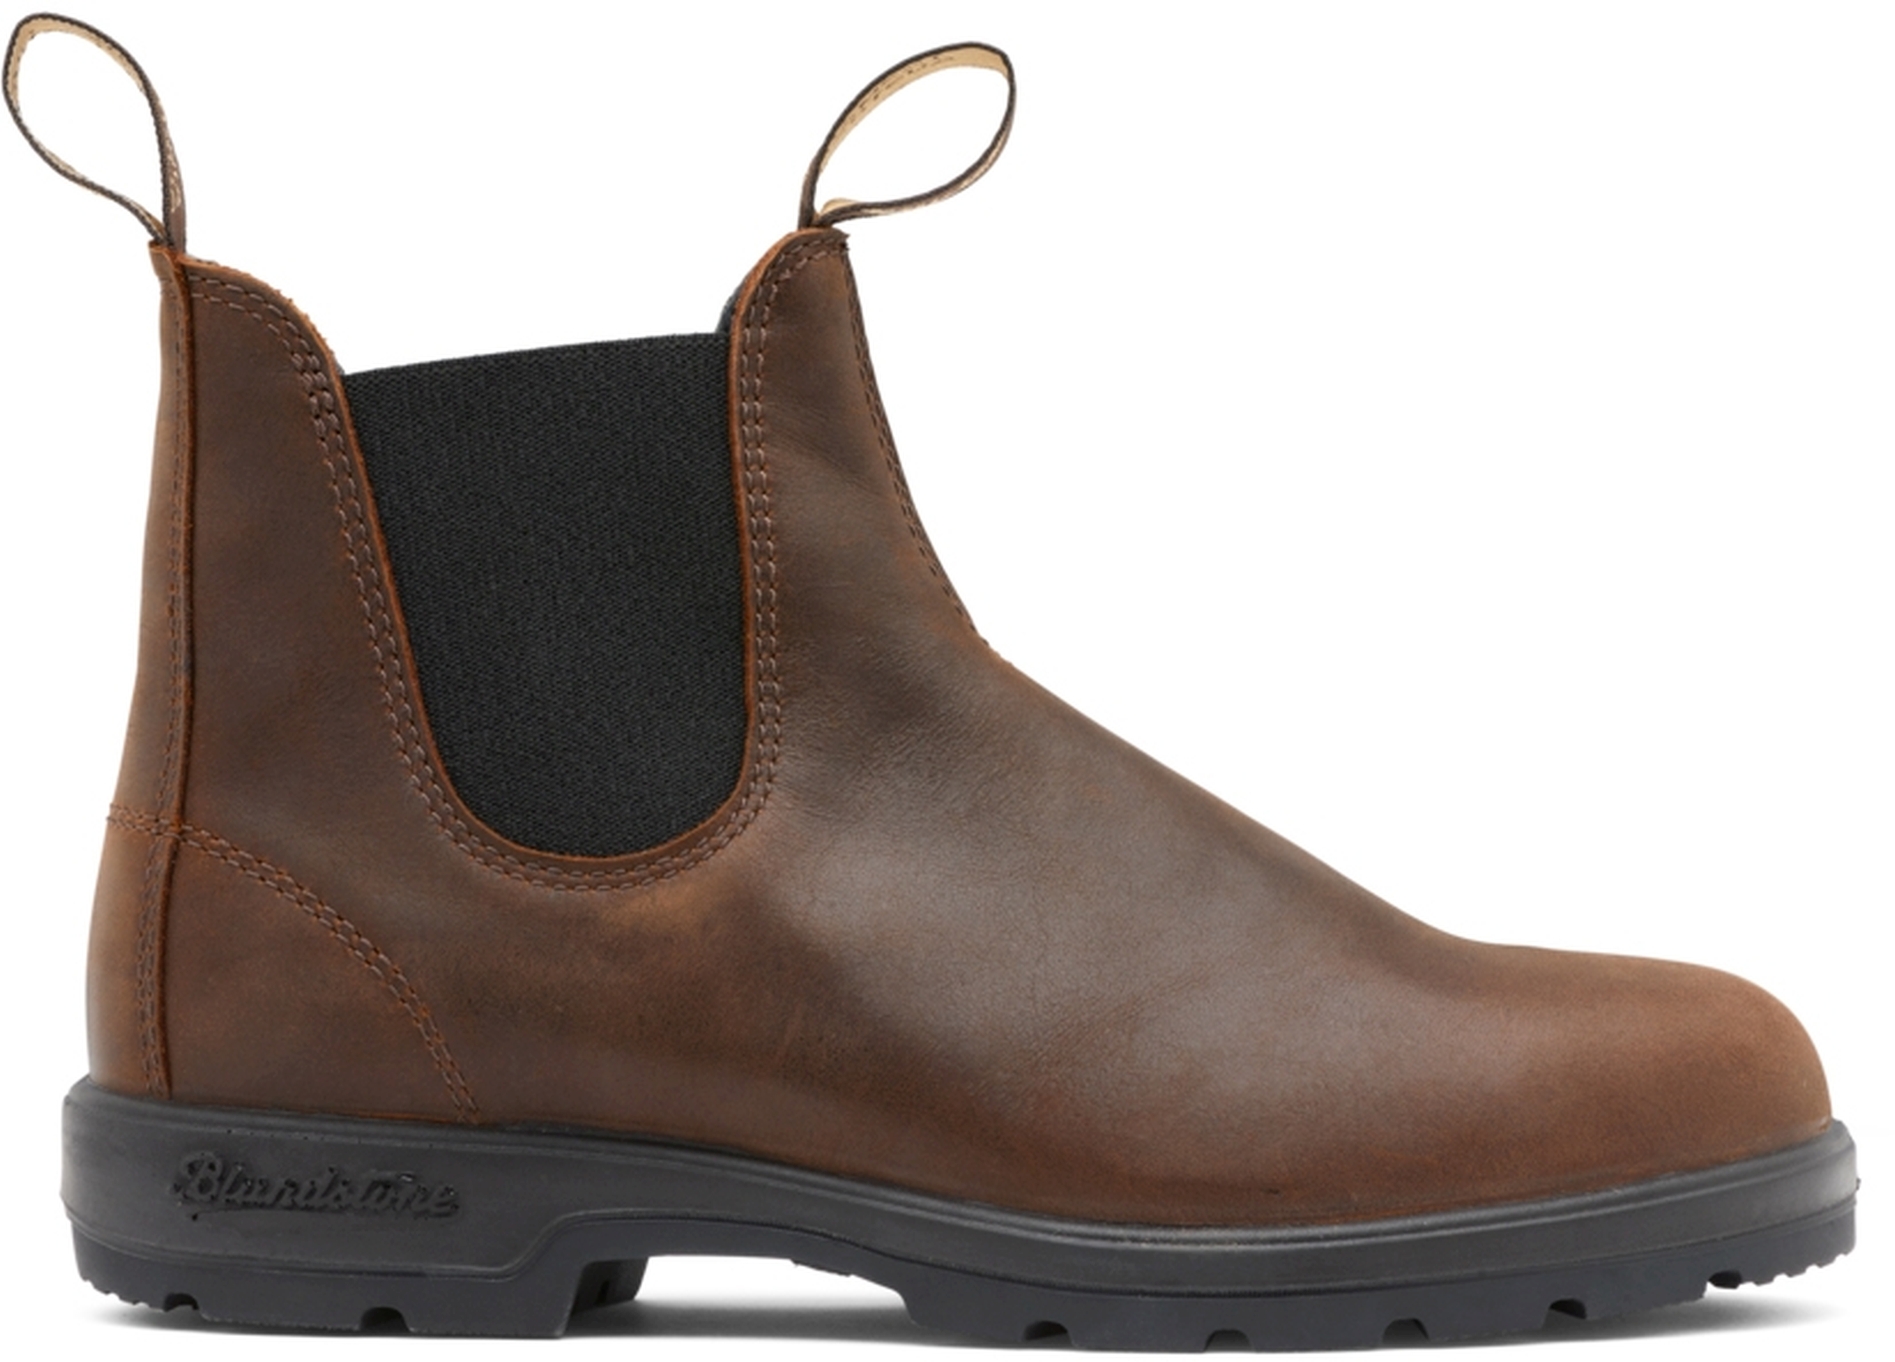 Blundstone Blundstone 1609 Antique Brown Leather (550 Series) Calf leather